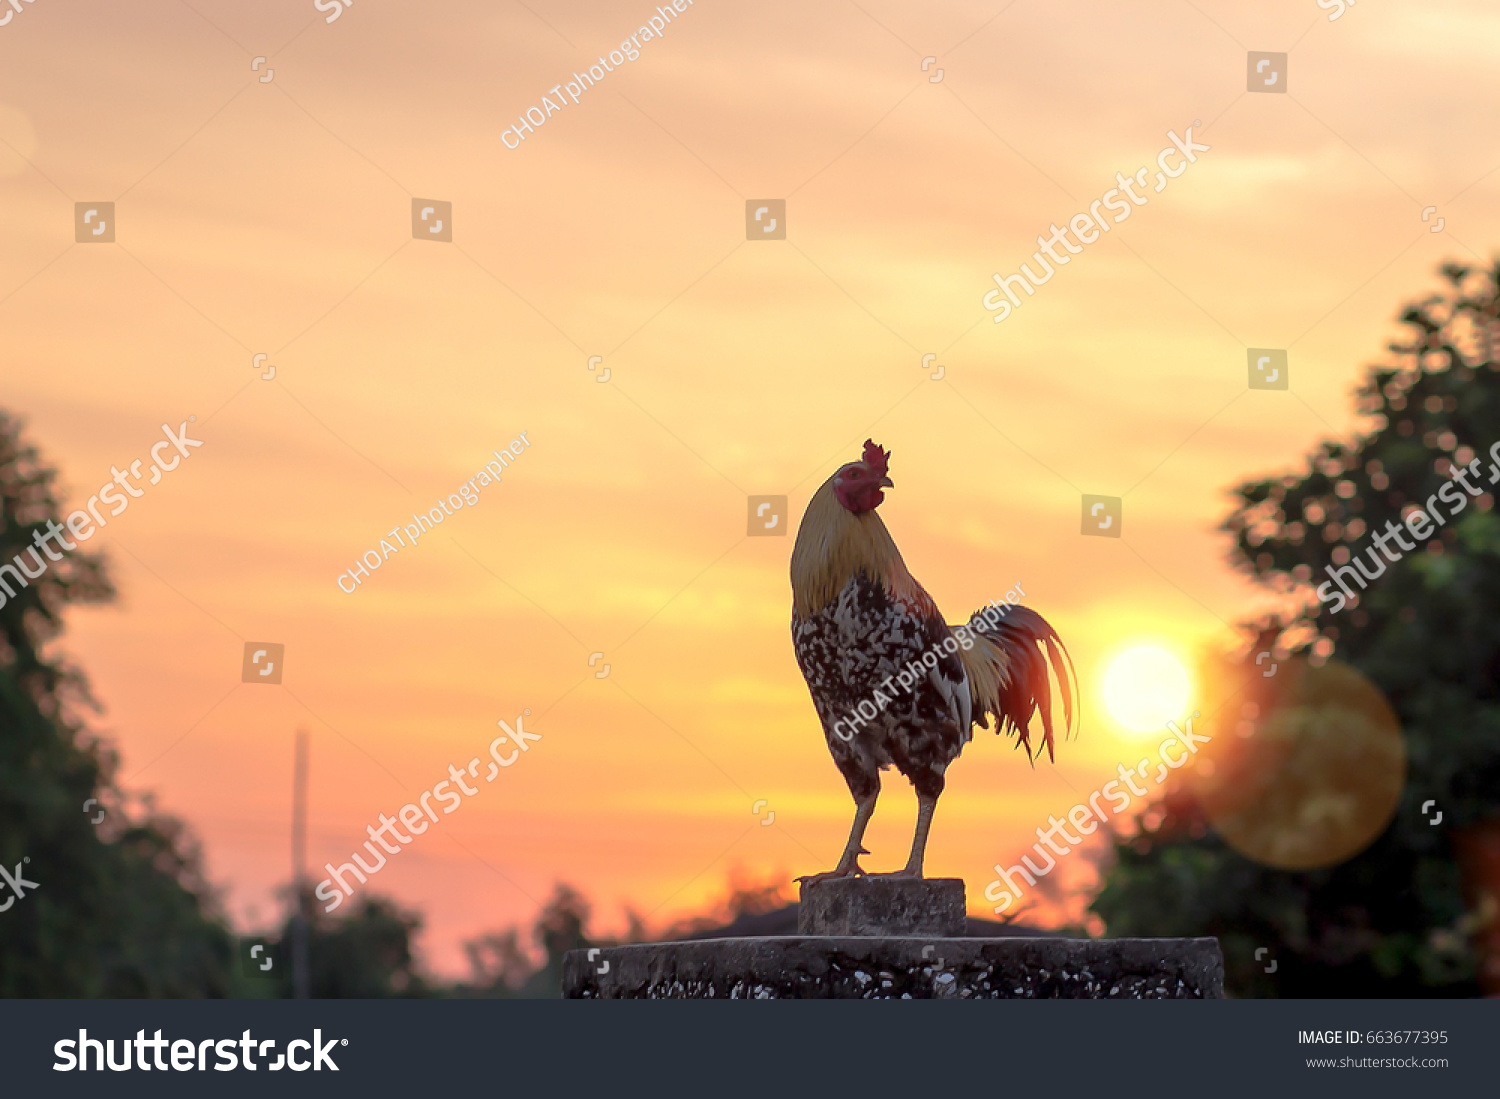 Early morning of new day concept: Silhouette rooster on blurred beautiful sunrise sky with sun light in farm autumn background #663677395